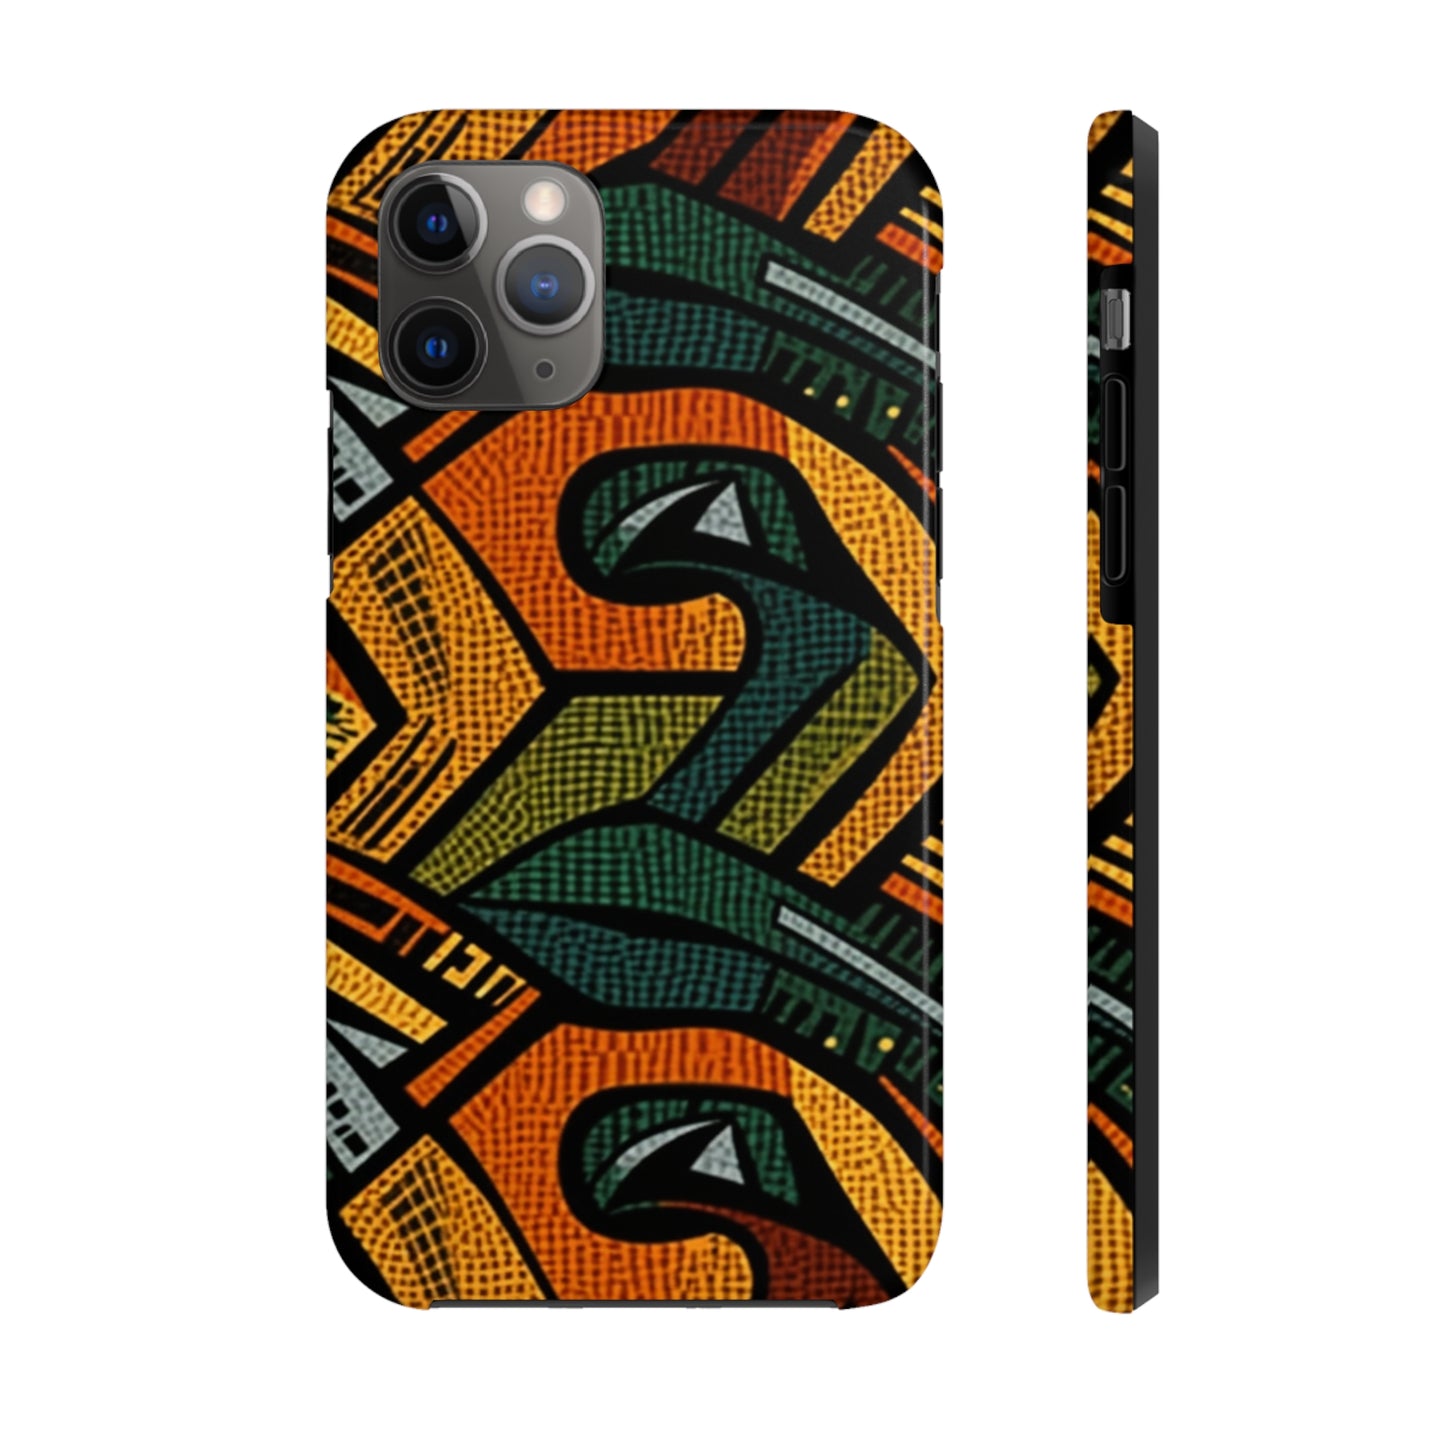 1960-1970s Style African Ornament Textile - Bold, Intricate Pattern - Tough Phone Cases